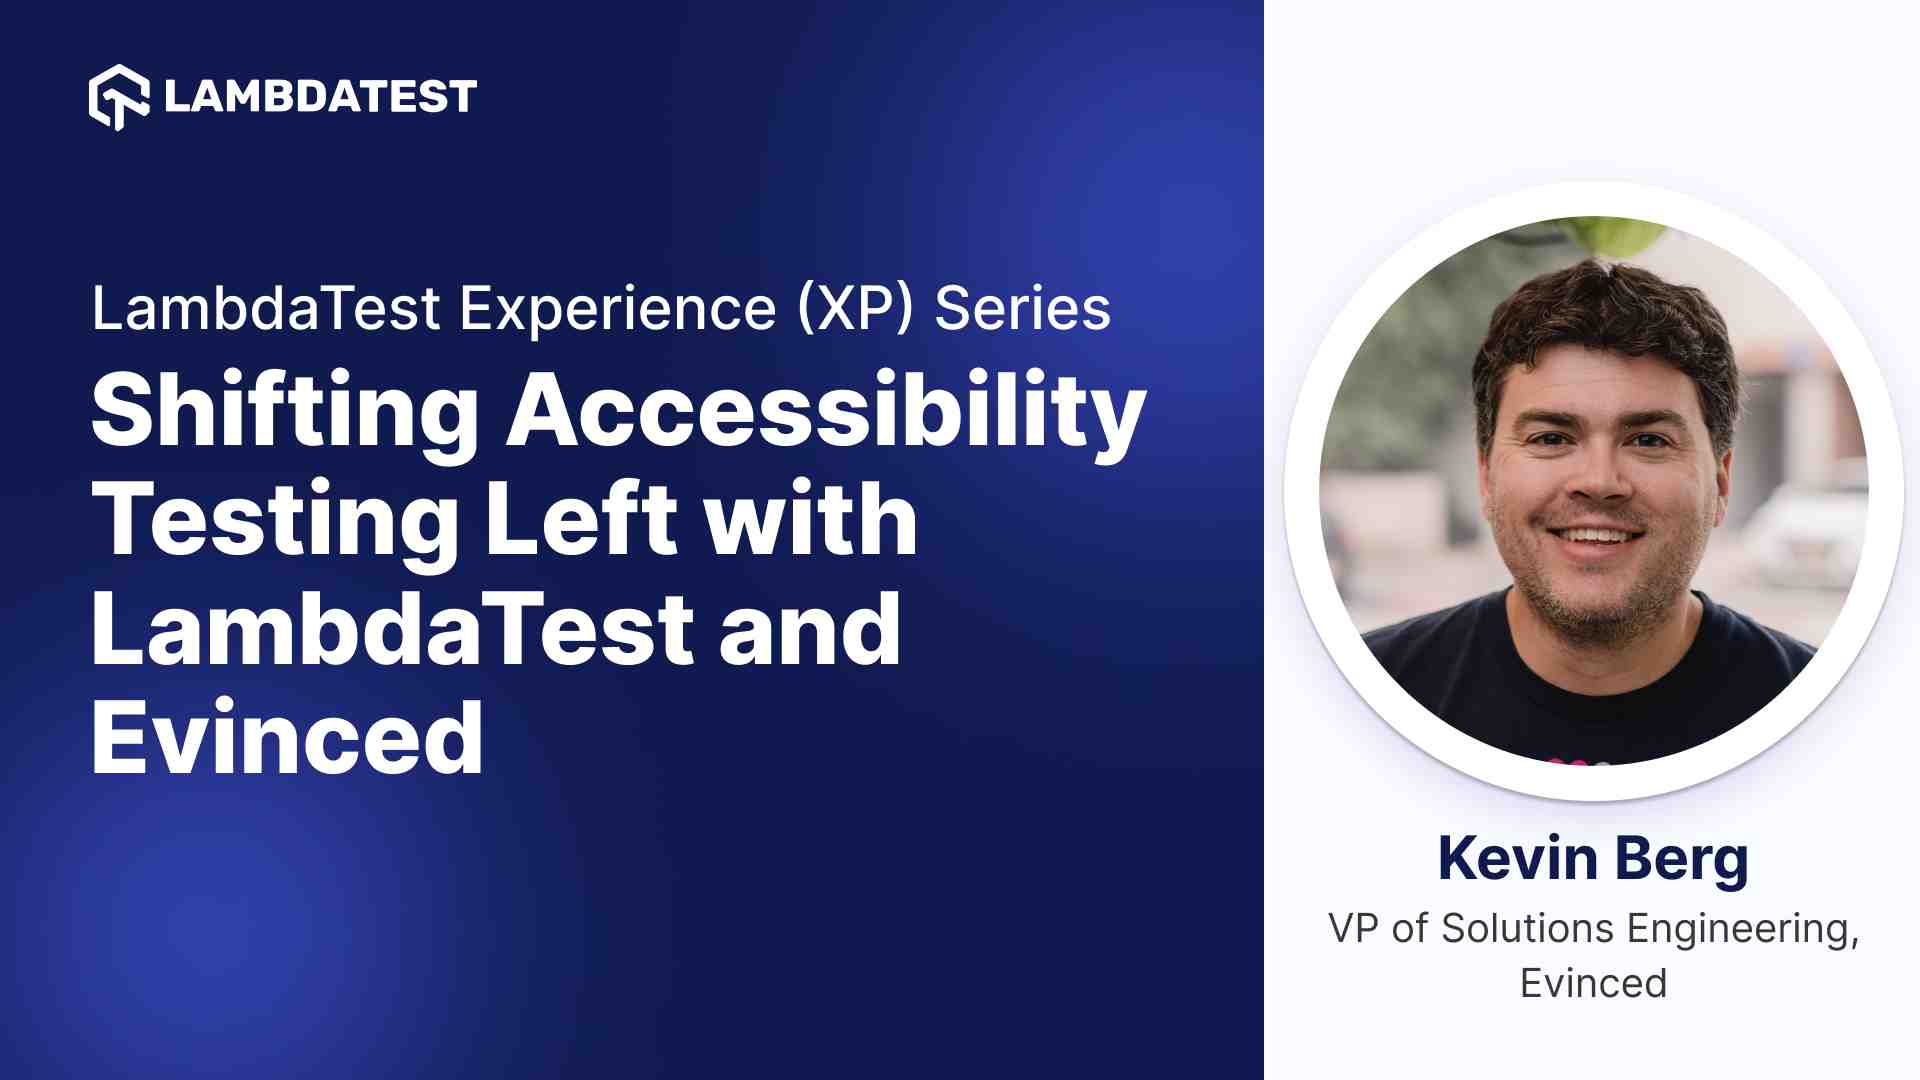 Shifting Accessibility Testing Left with LambdaTest and Evinced